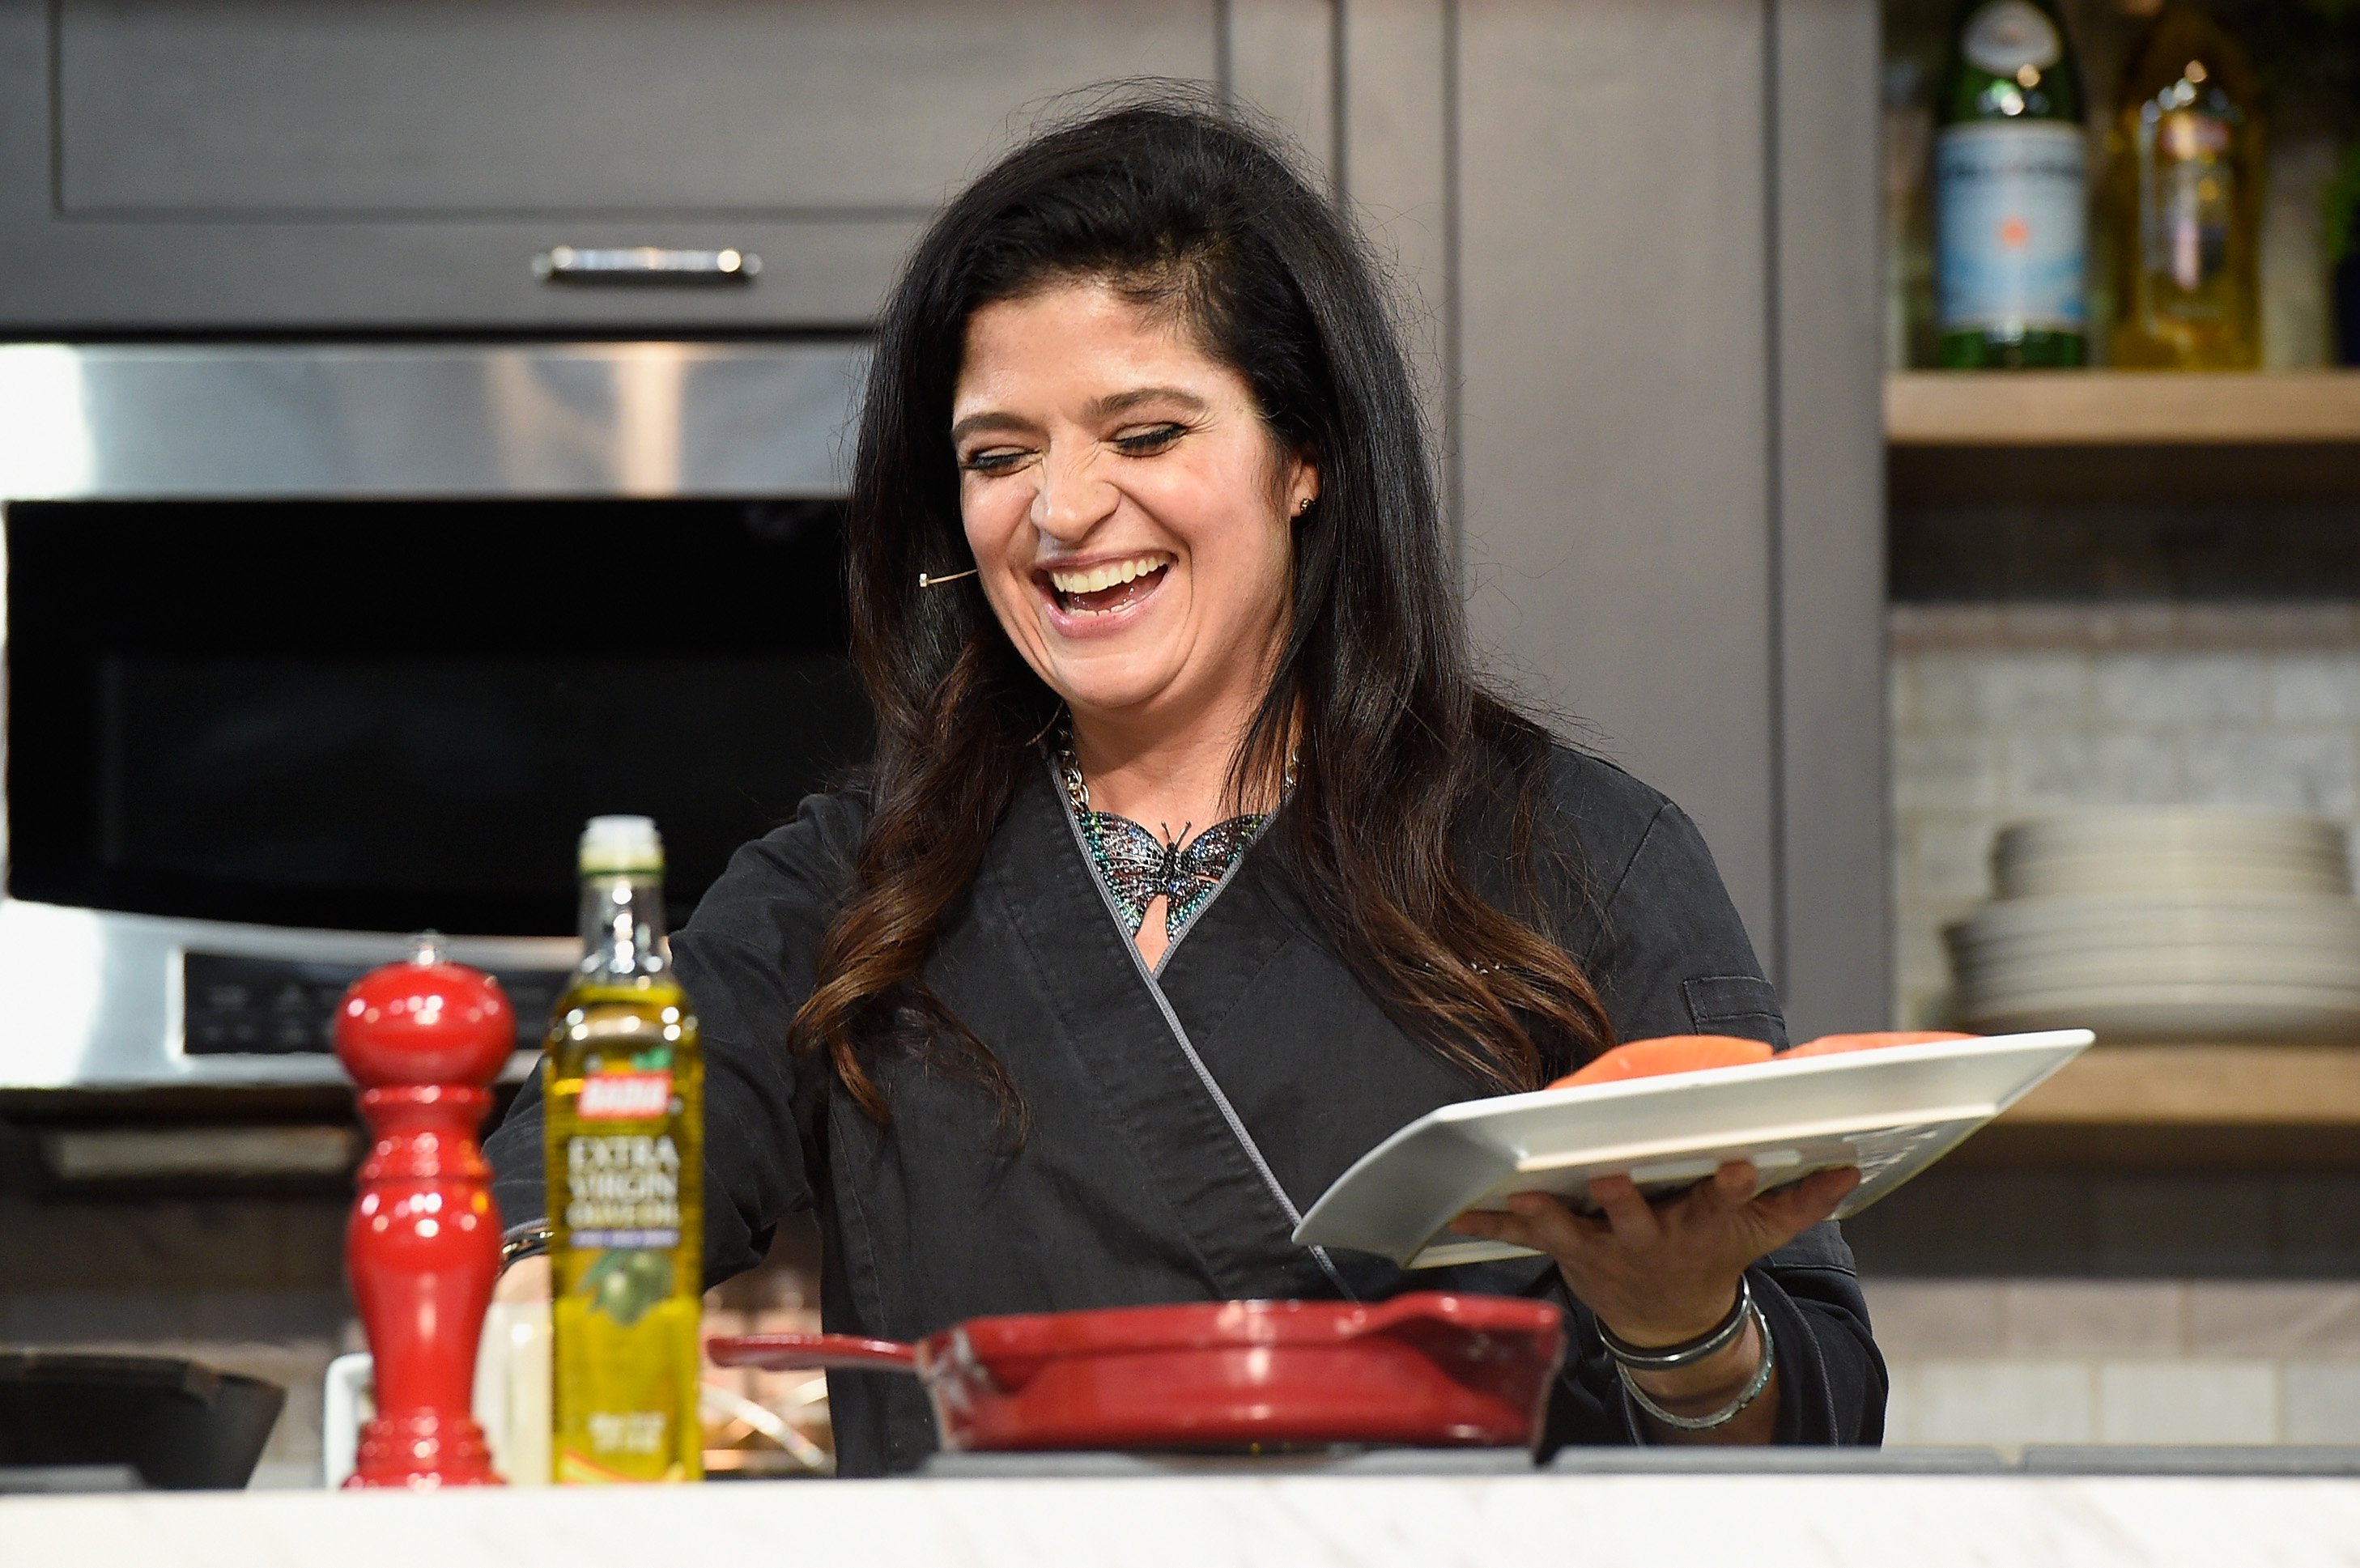 Alex Guarnaschelli pictured on stage at the Food Network & Cooking Channel New York City Wine & Food Festival at Pier 94 on October 15, 2016 in New York City. / Source: Getty Images